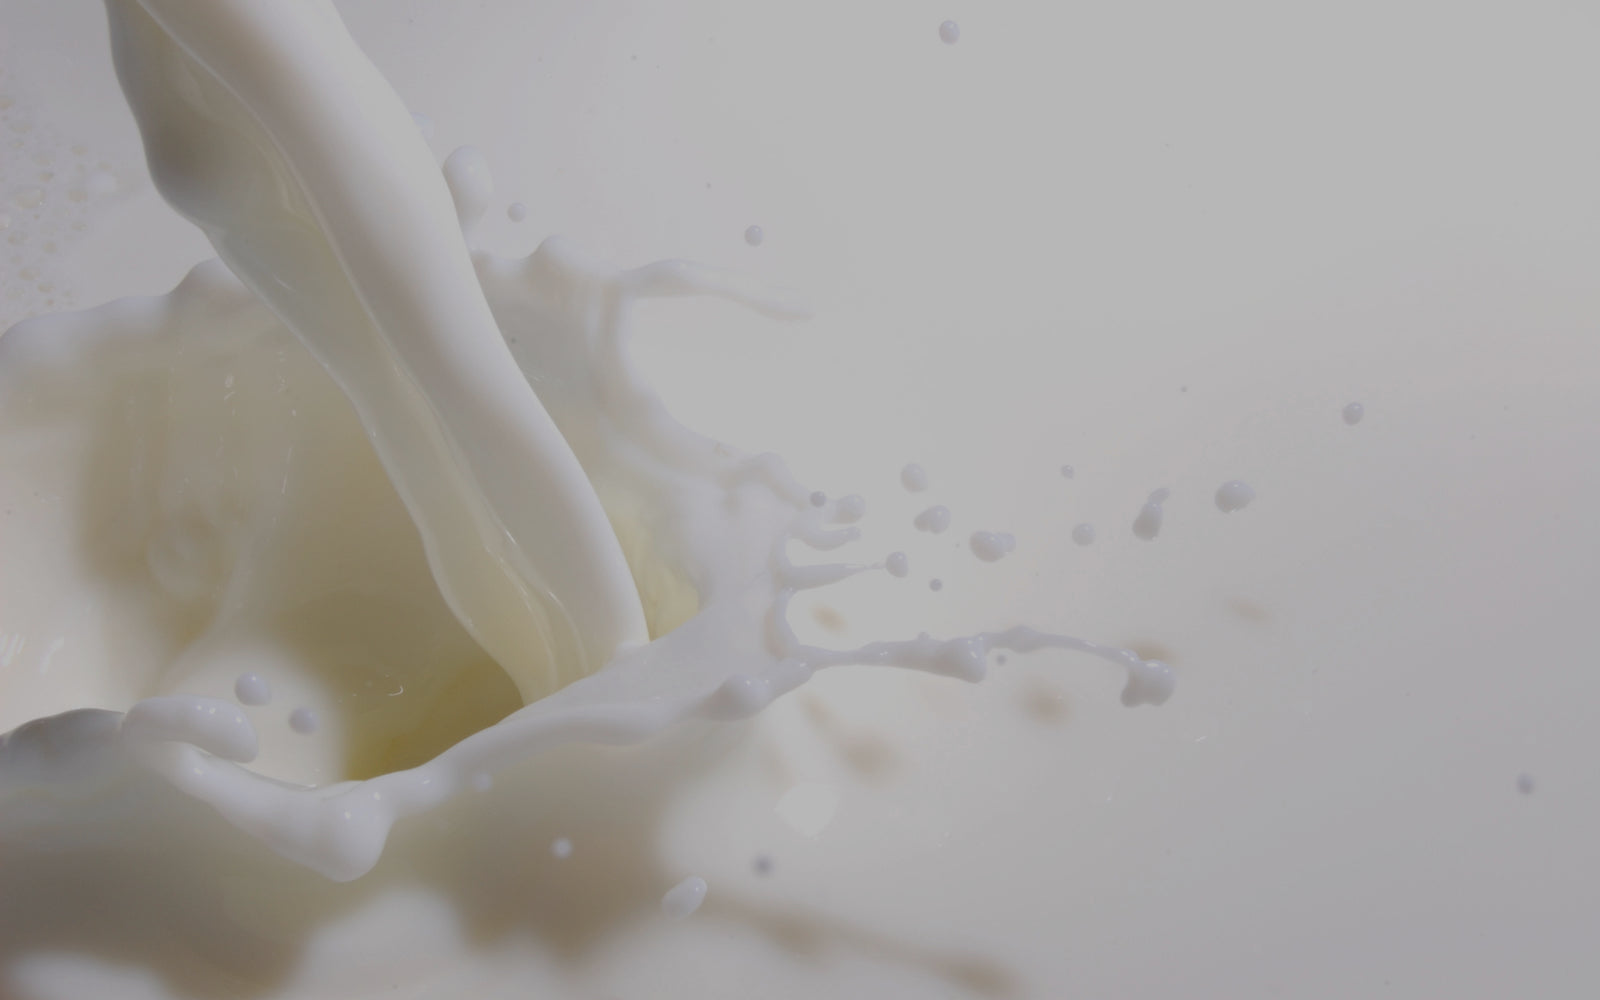 A1 vs. A2 Milk: What’s the Difference?